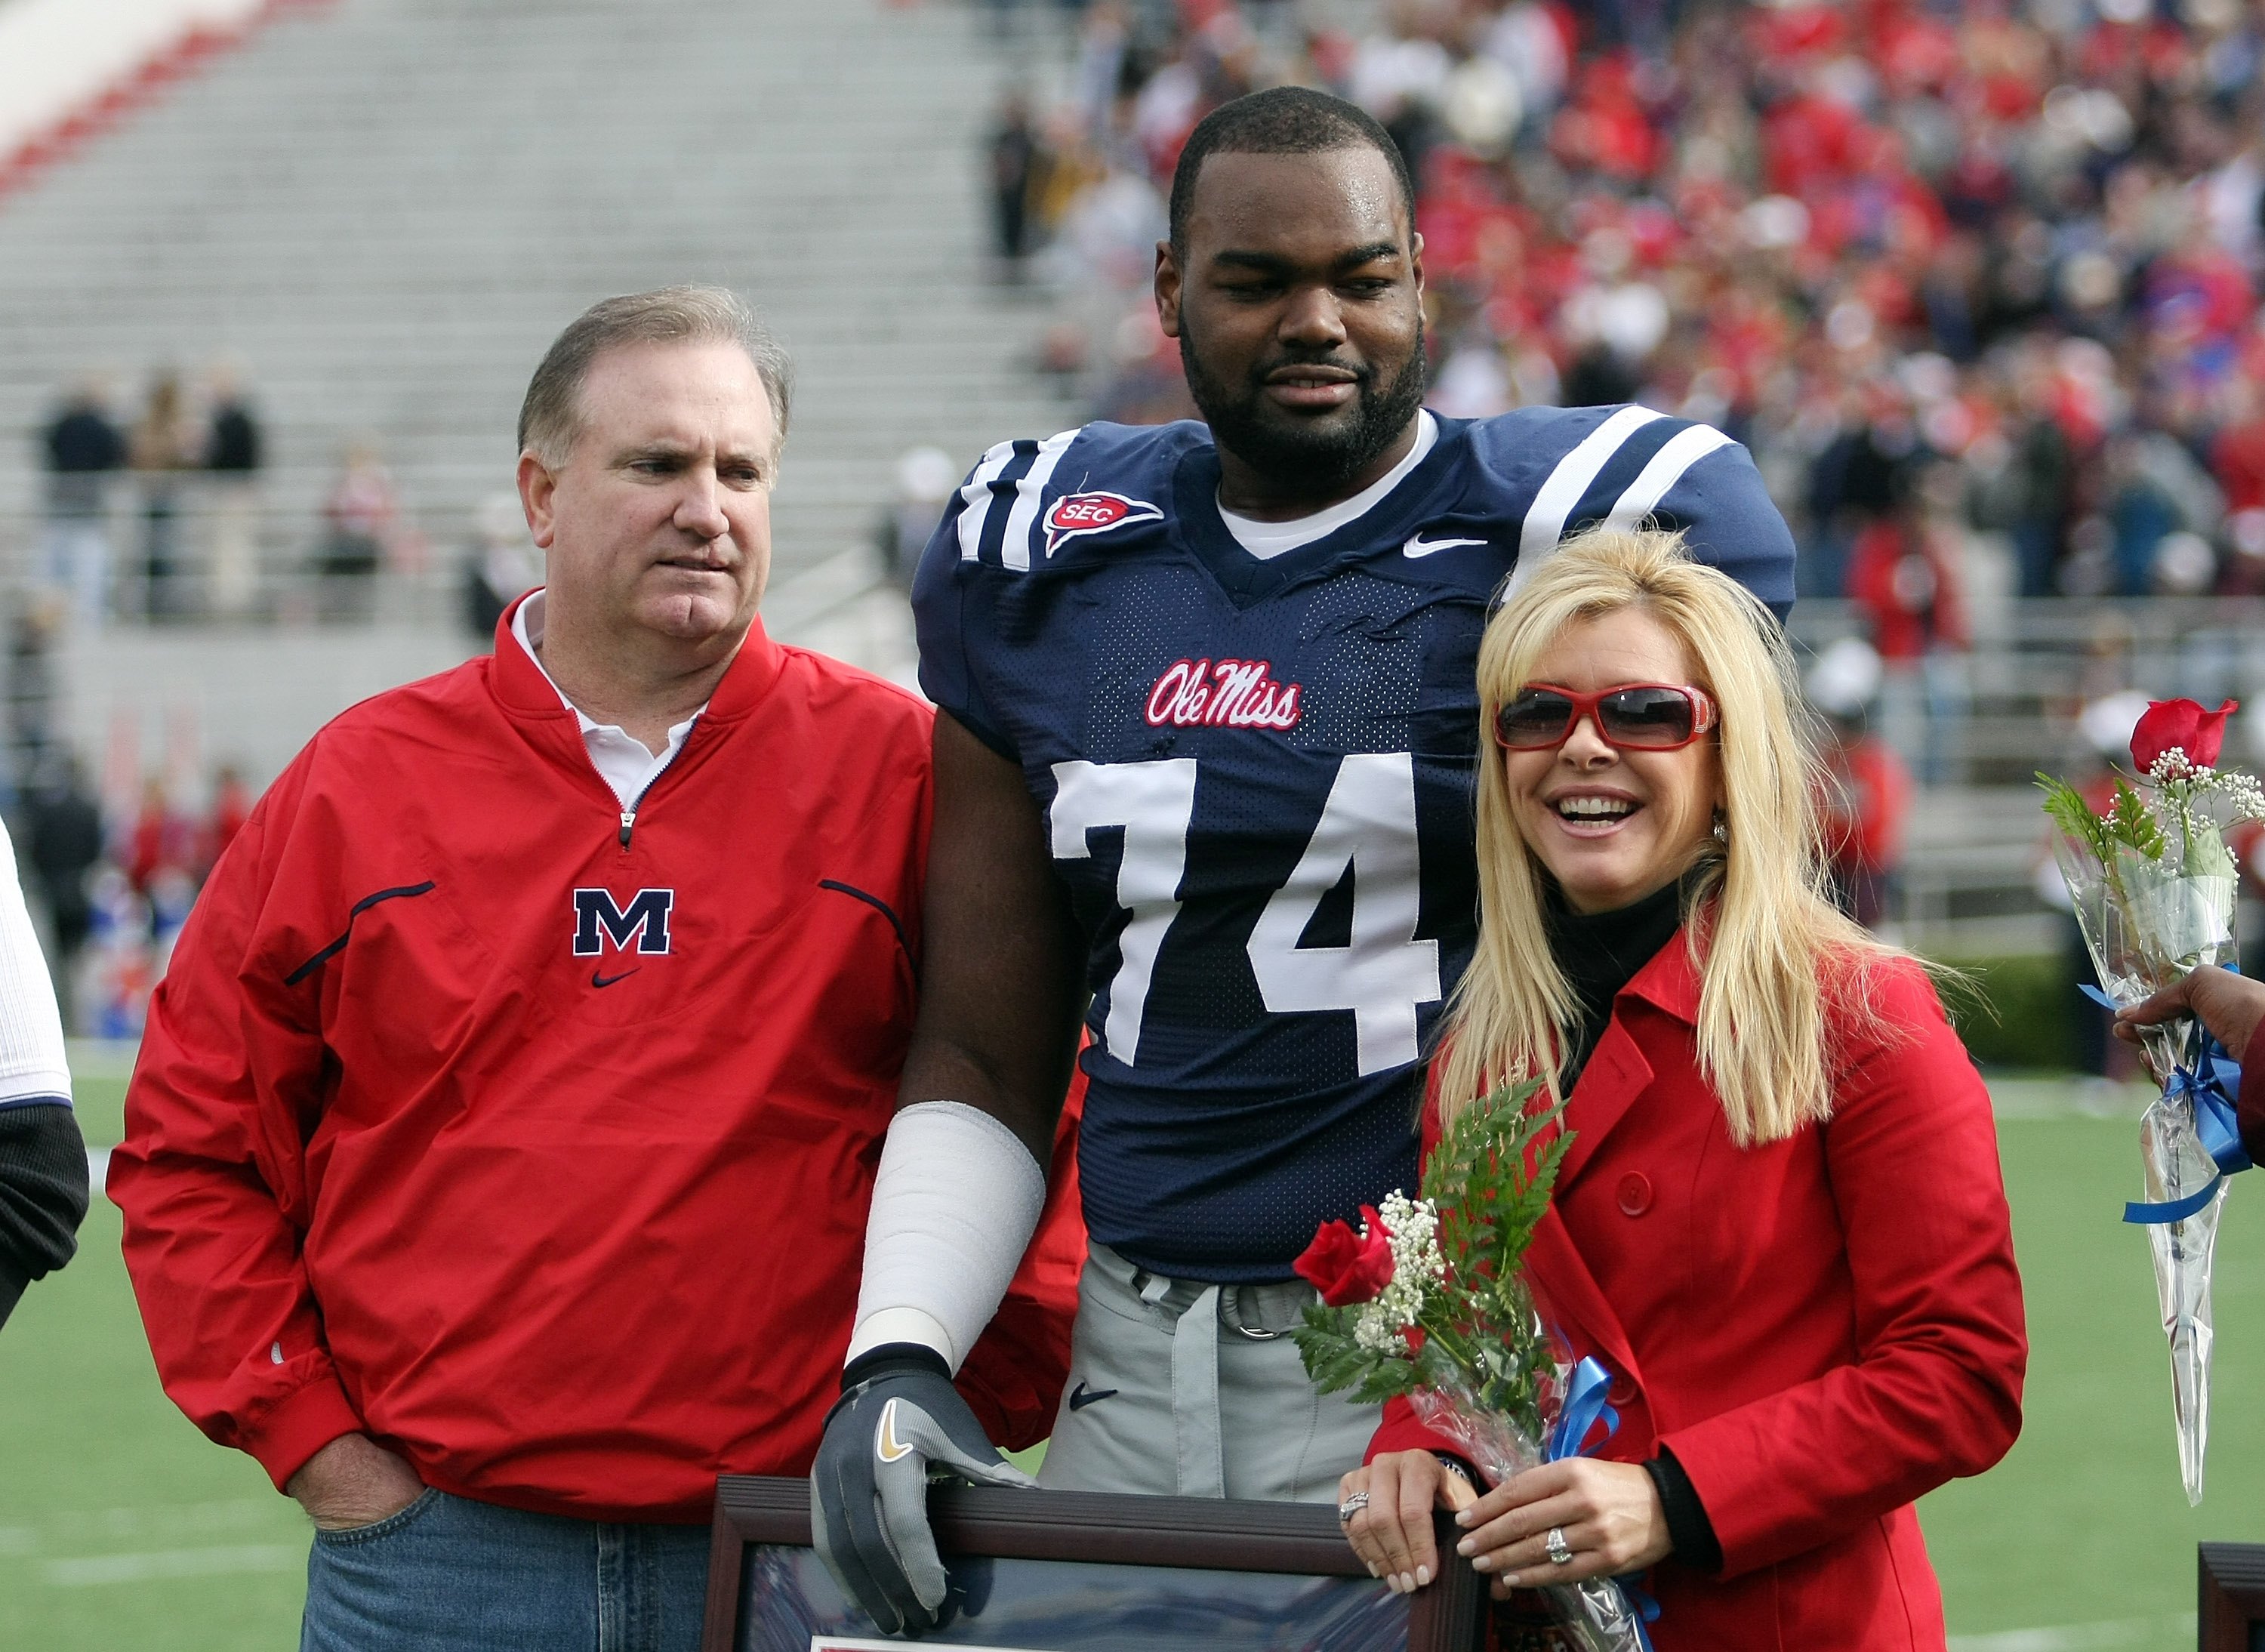 Michael Oher with Sean and Leigh Anne Tuohy prior to a game against the Mississippi State Bulldogs on November 28, 2008, in Oxford, Mississippi. | Source: Getty Images